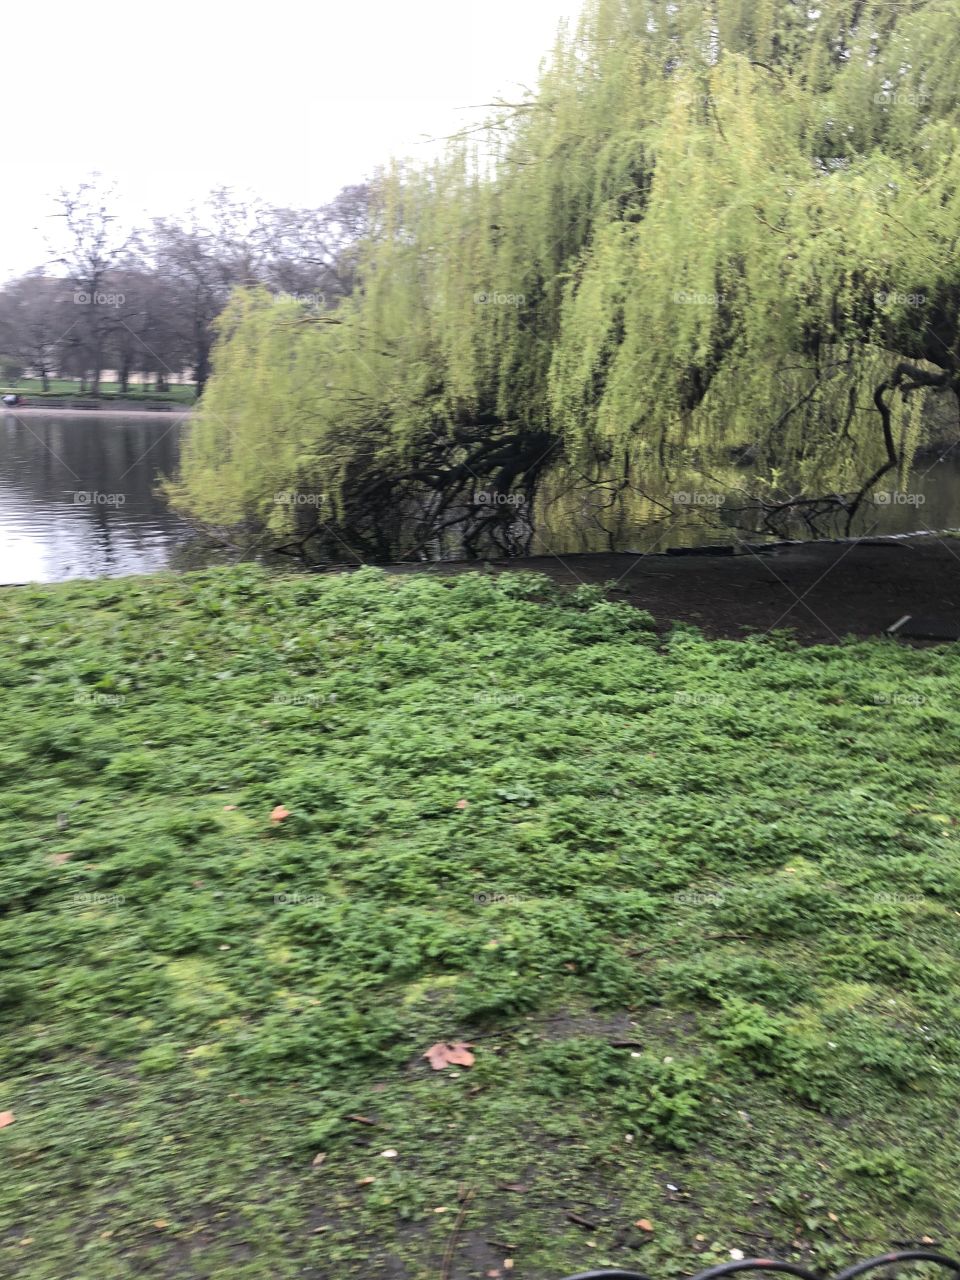 Some of the verdant spring life inside St. James’s Park just outside of Buckingham Palace in London. 